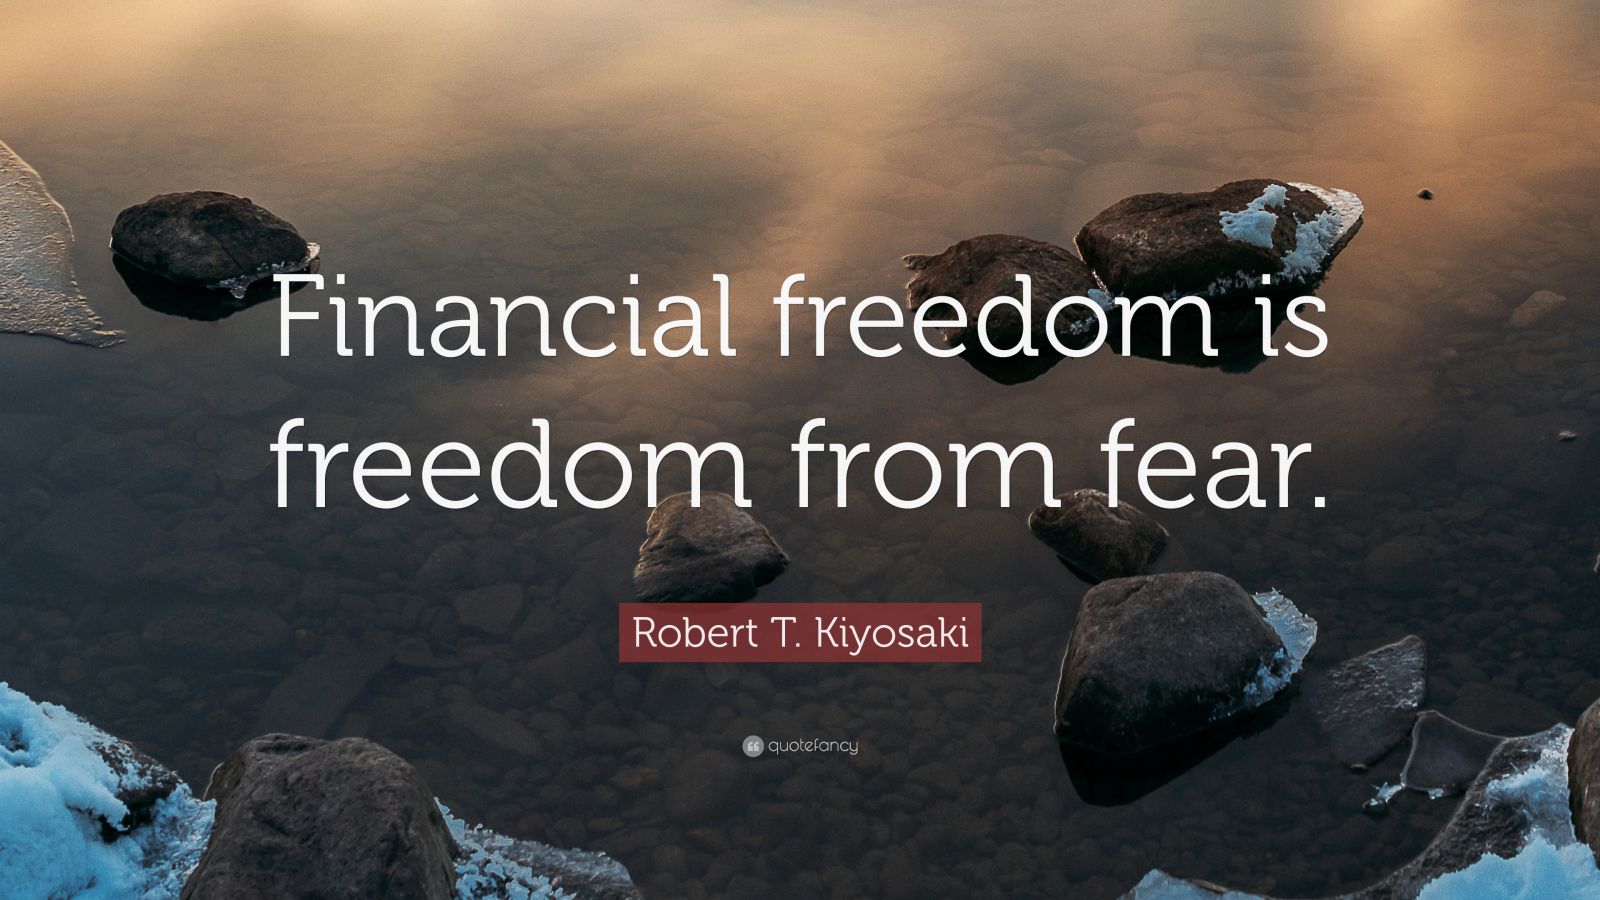 Robert T. Kiyosaki Quote: “Financial freedom is freedom from fear.” (19